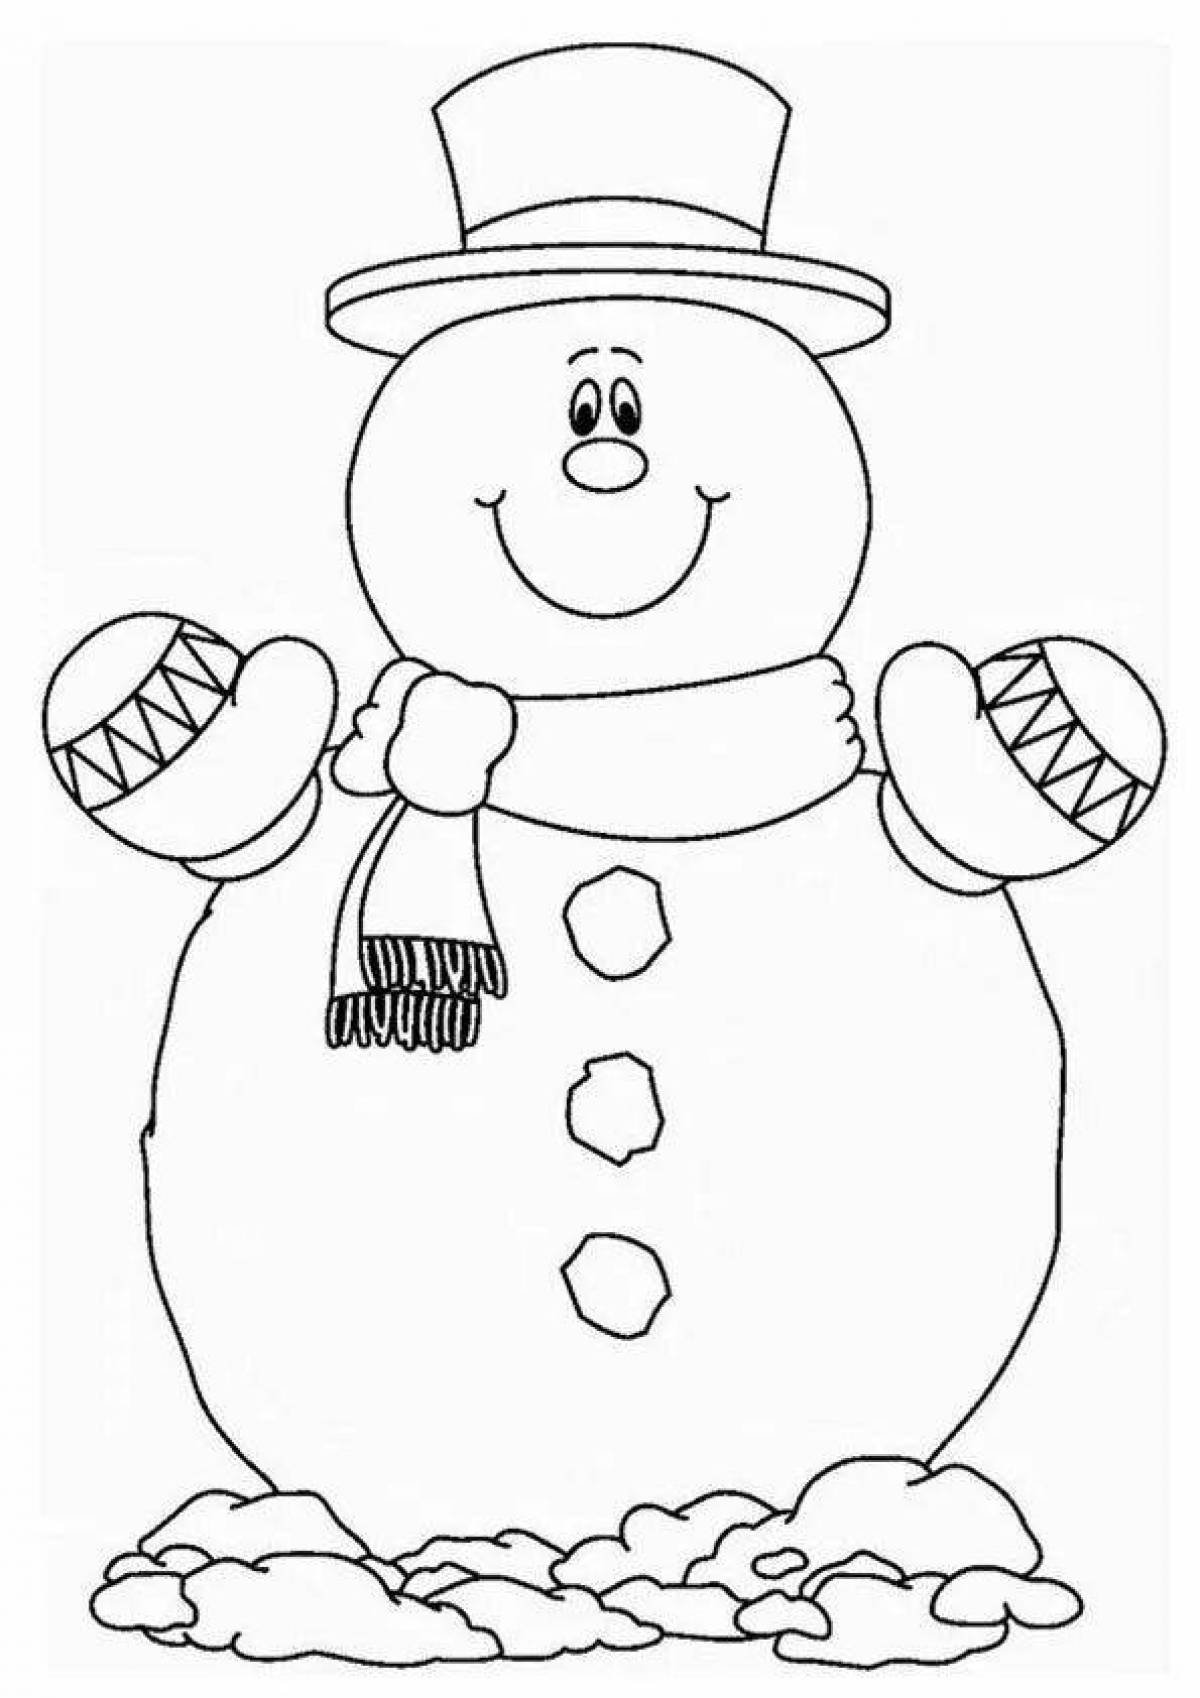 Violent coloring snowman for children 6-7 years old